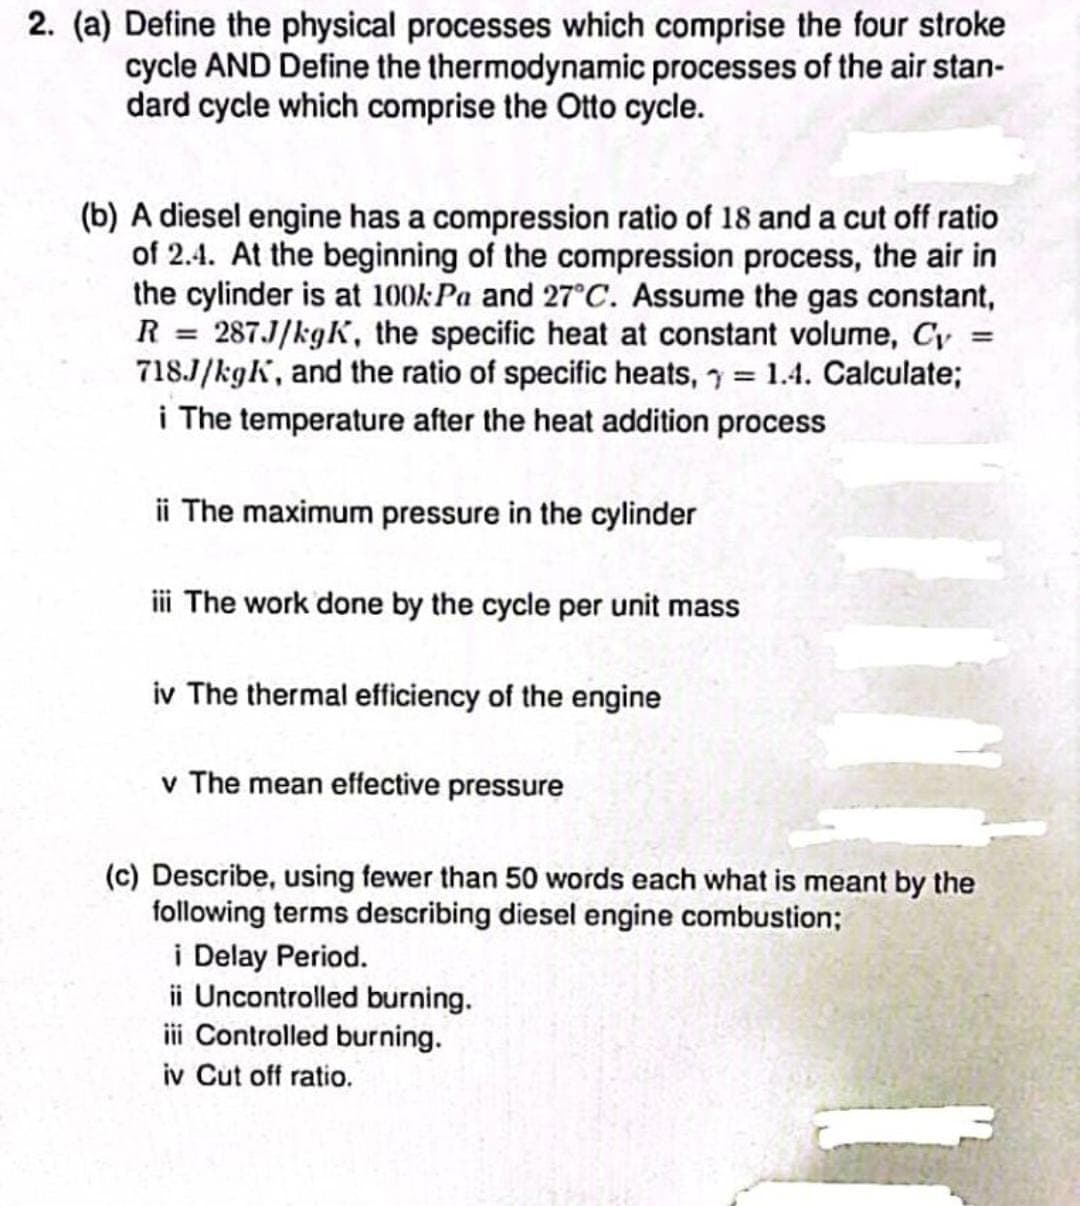 2. (a) Define the physical processes which comprise the four stroke
cycle AND Define the thermodynamic processes of the air stan-
dard cycle which comprise the Otto cycle.
(b) A diesel engine has a compression ratio of 18 and a cut off ratio
of 2.4. At the beginning of the compression process, the air in
the cylinder is at 100kPa and 27°C. Assume the gas constant,
R = 287J/kgK, the specific heat at constant volume, Cy
718J/kgk, and the ratio of specific heats,= 1.4. Calculate;
i The temperature after the heat addition process
=
ii The maximum pressure in the cylinder
iii The work done by the cycle per unit mass
iv The thermal efficiency of the engine
v The mean effective pressure
(c) Describe, using fewer than 50 words each what is meant by the
following terms describing diesel engine combustion;
i Delay Period.
ii Uncontrolled burning.
iii Controlled burning.
iv Cut off ratio.